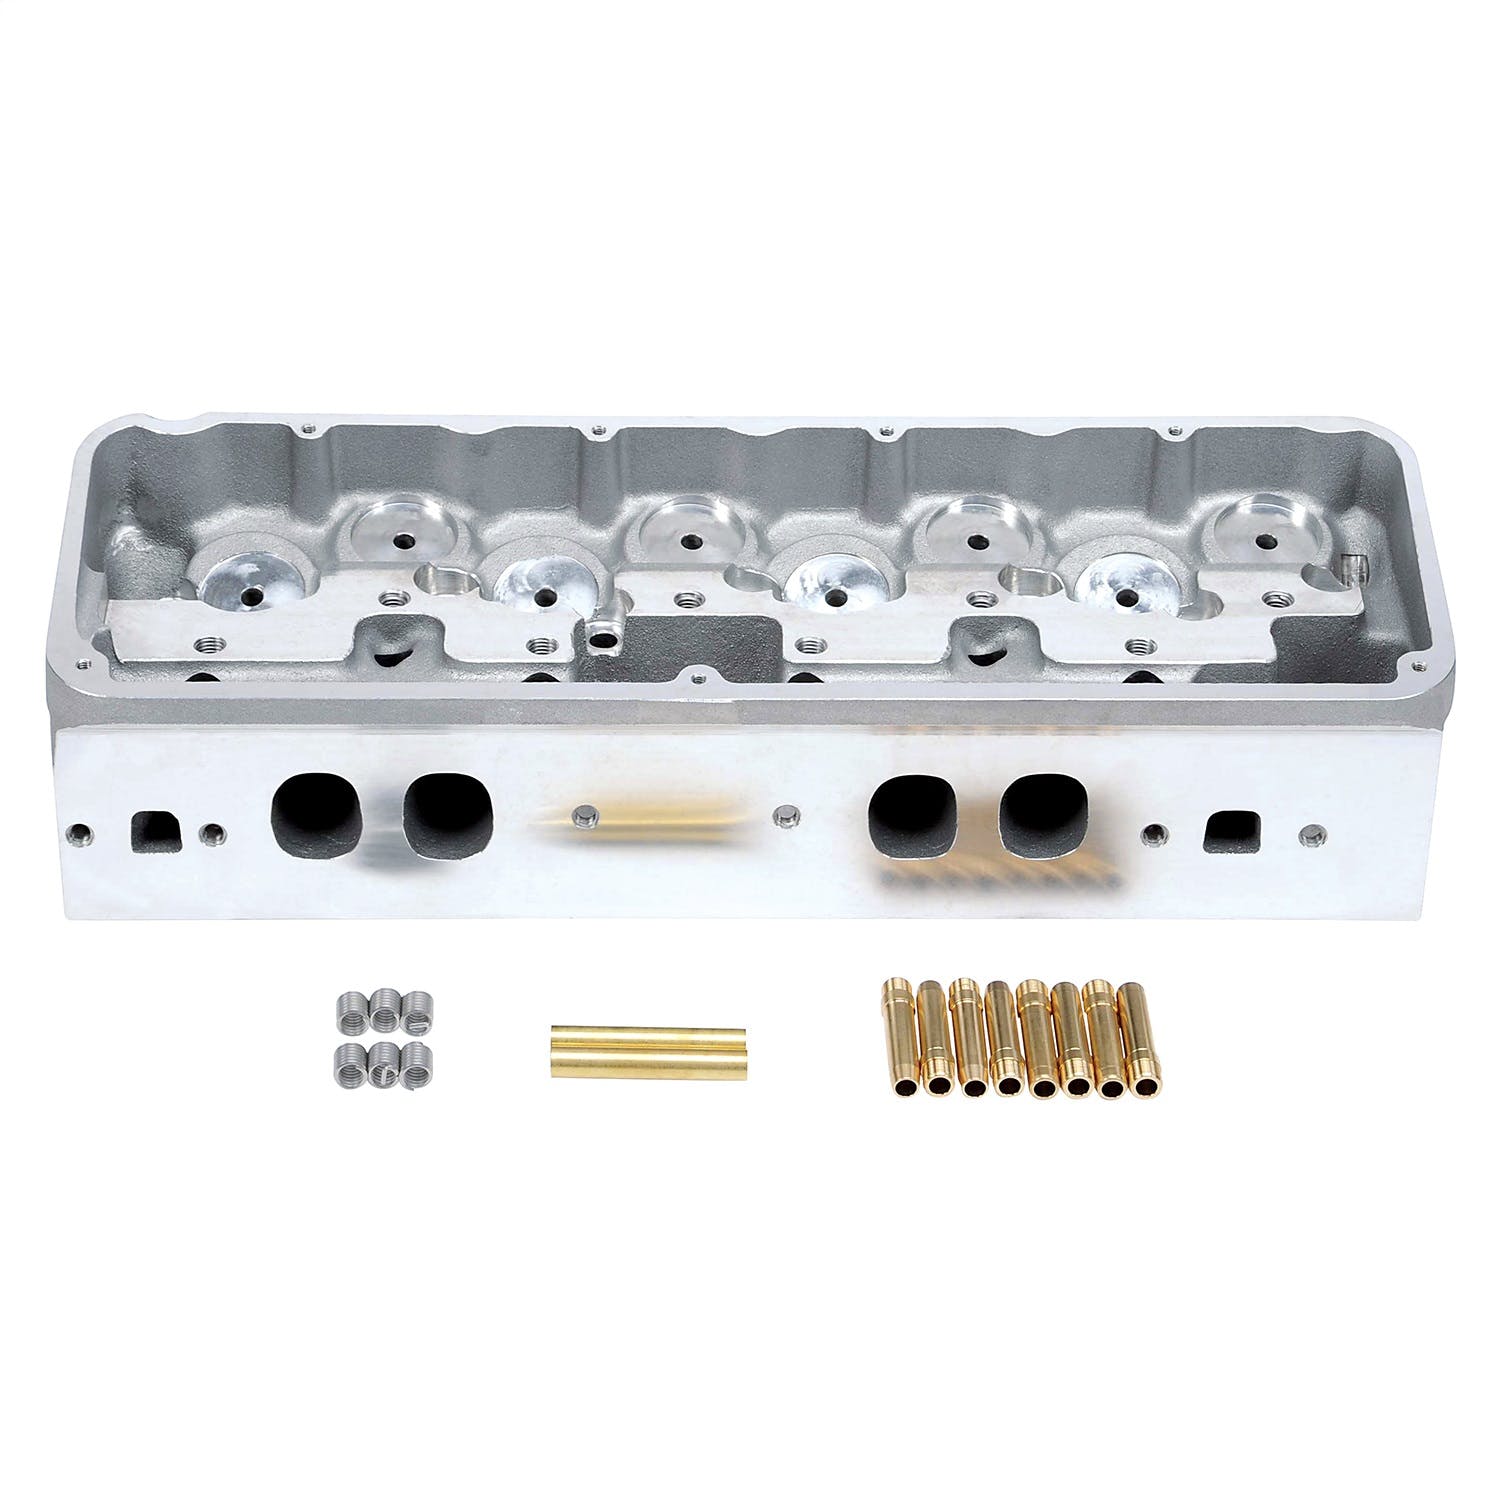 Edelbrock 614469 CYL HEAD BBC PRO PORT VICTOR HIGH PORT CONVENTIONAL DR-23 HIPd PRO PORT RAW